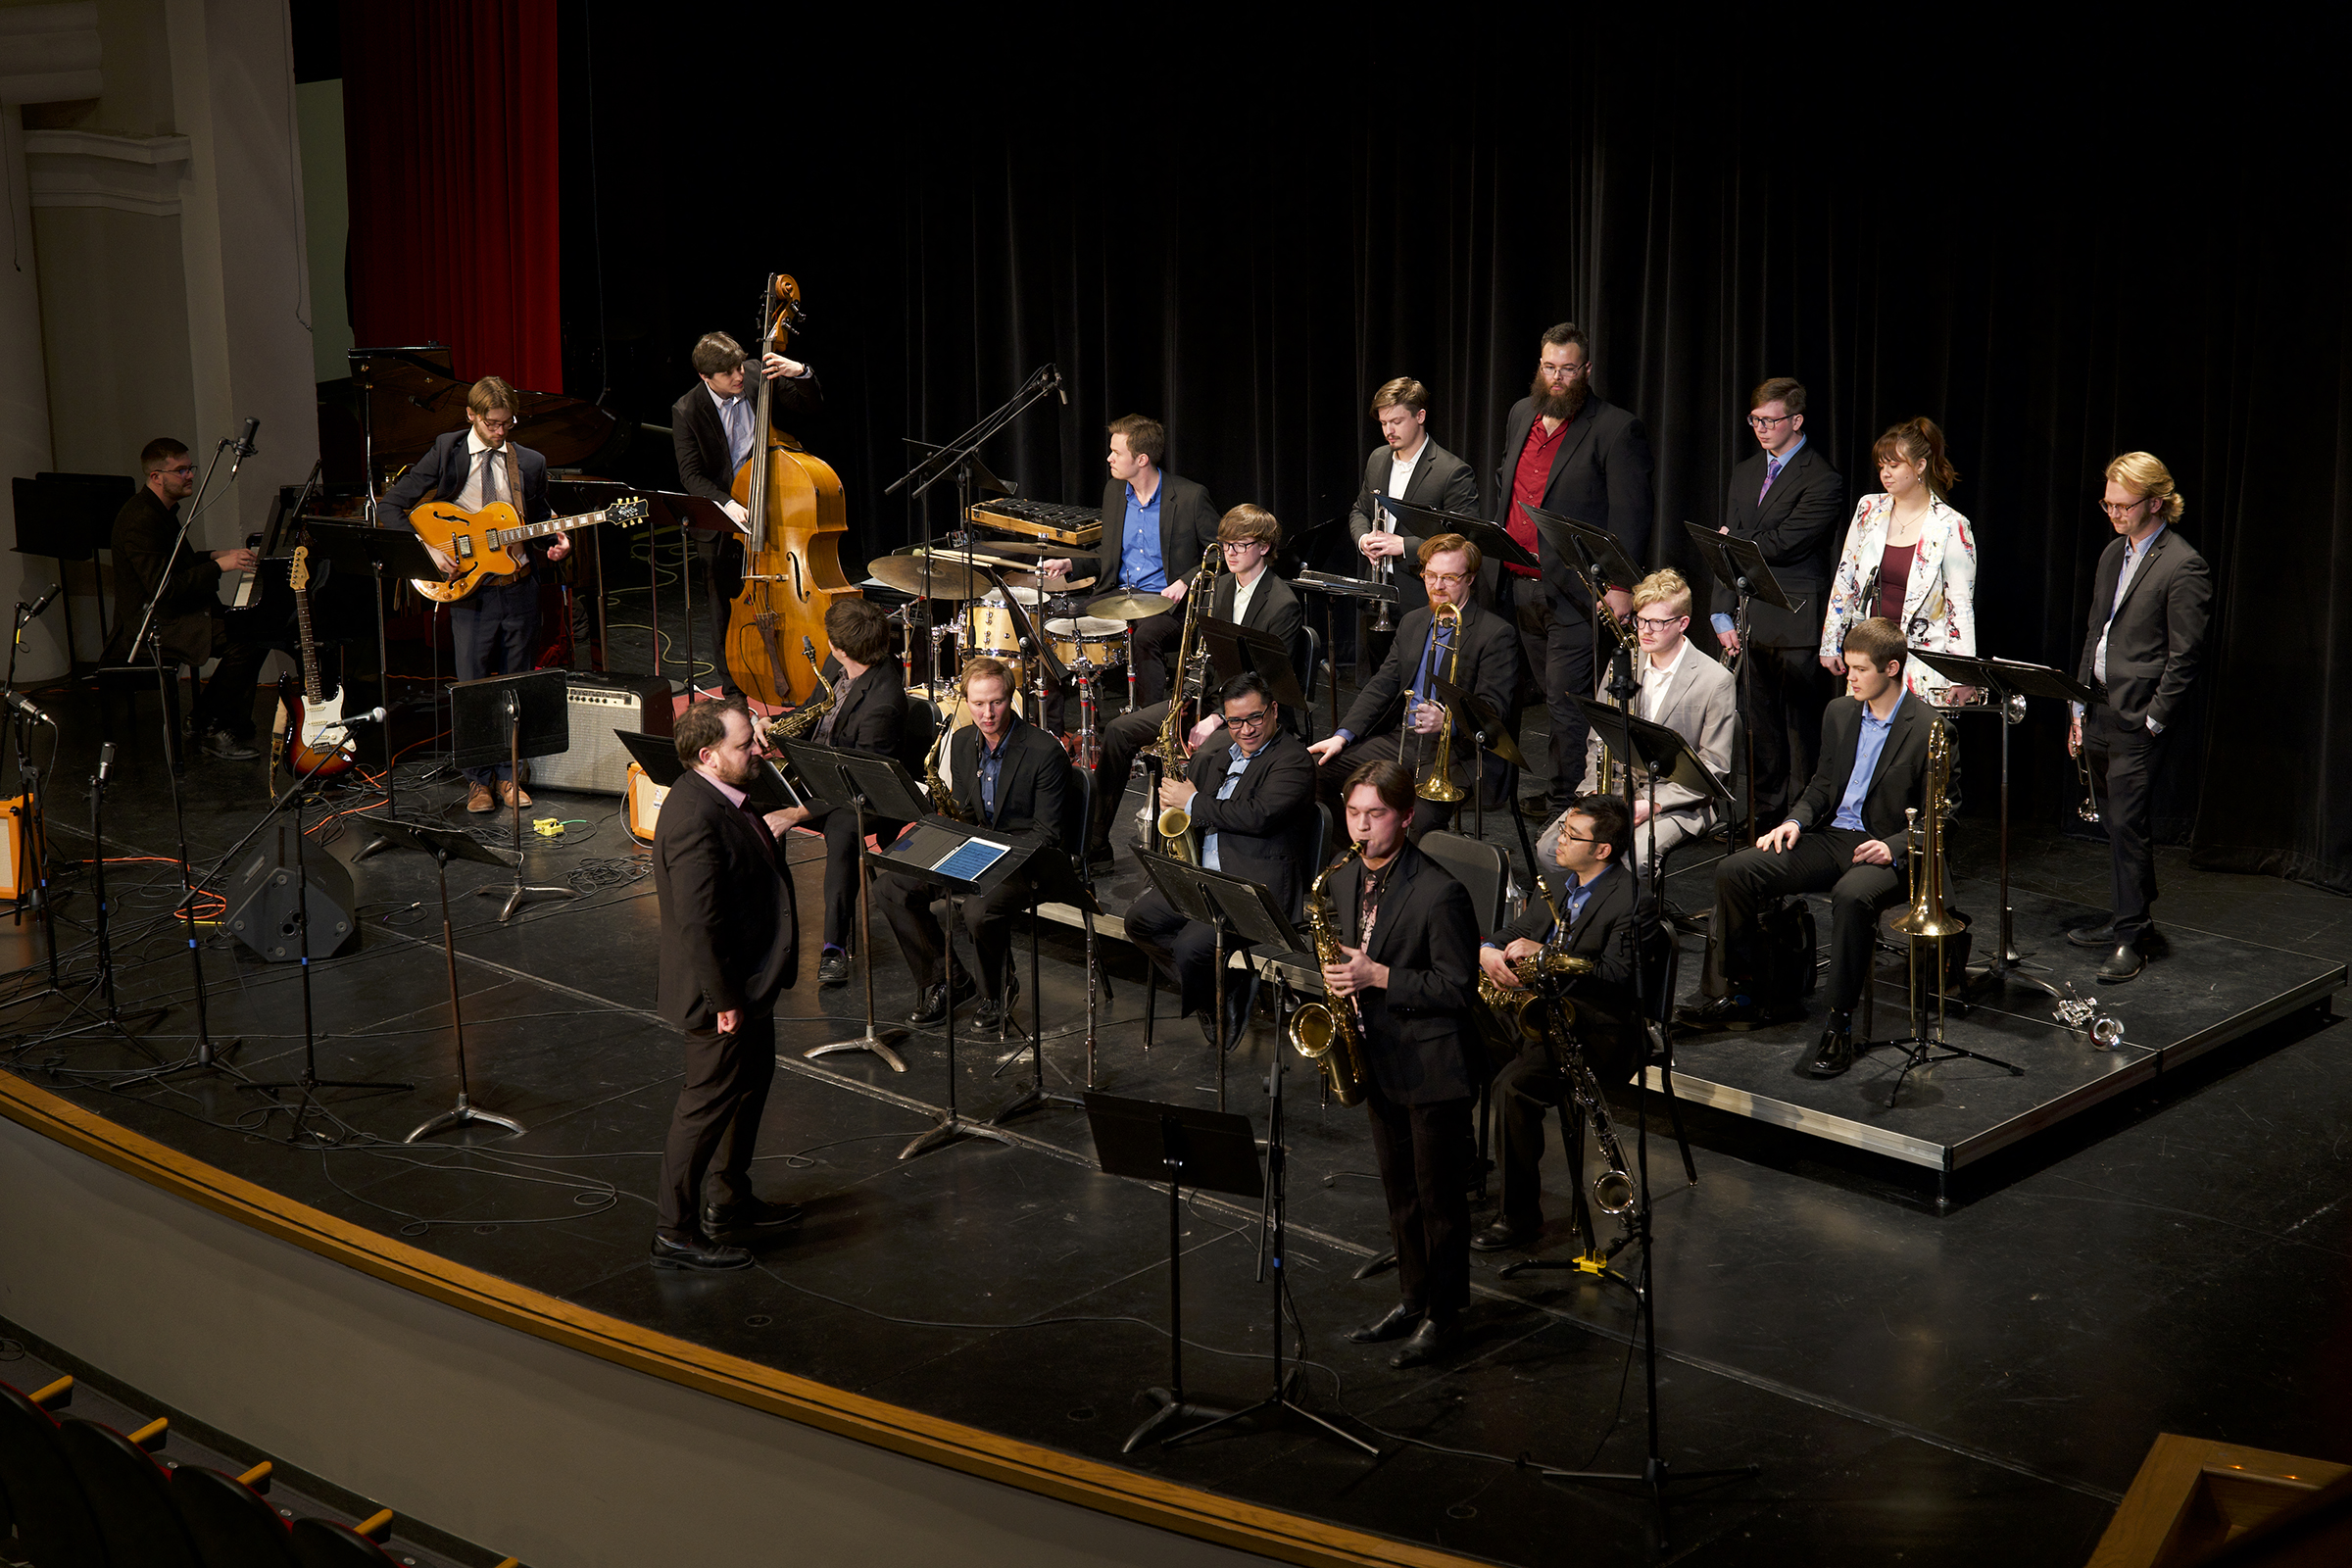 The UNL Jazz Orchestra, under the direction of Associate Professor of Composition and Jazz Studies Greg Simon, will perform April 26 at The Jewell in Omaha. Photo courtesy of the Glenn Korff School of Music.